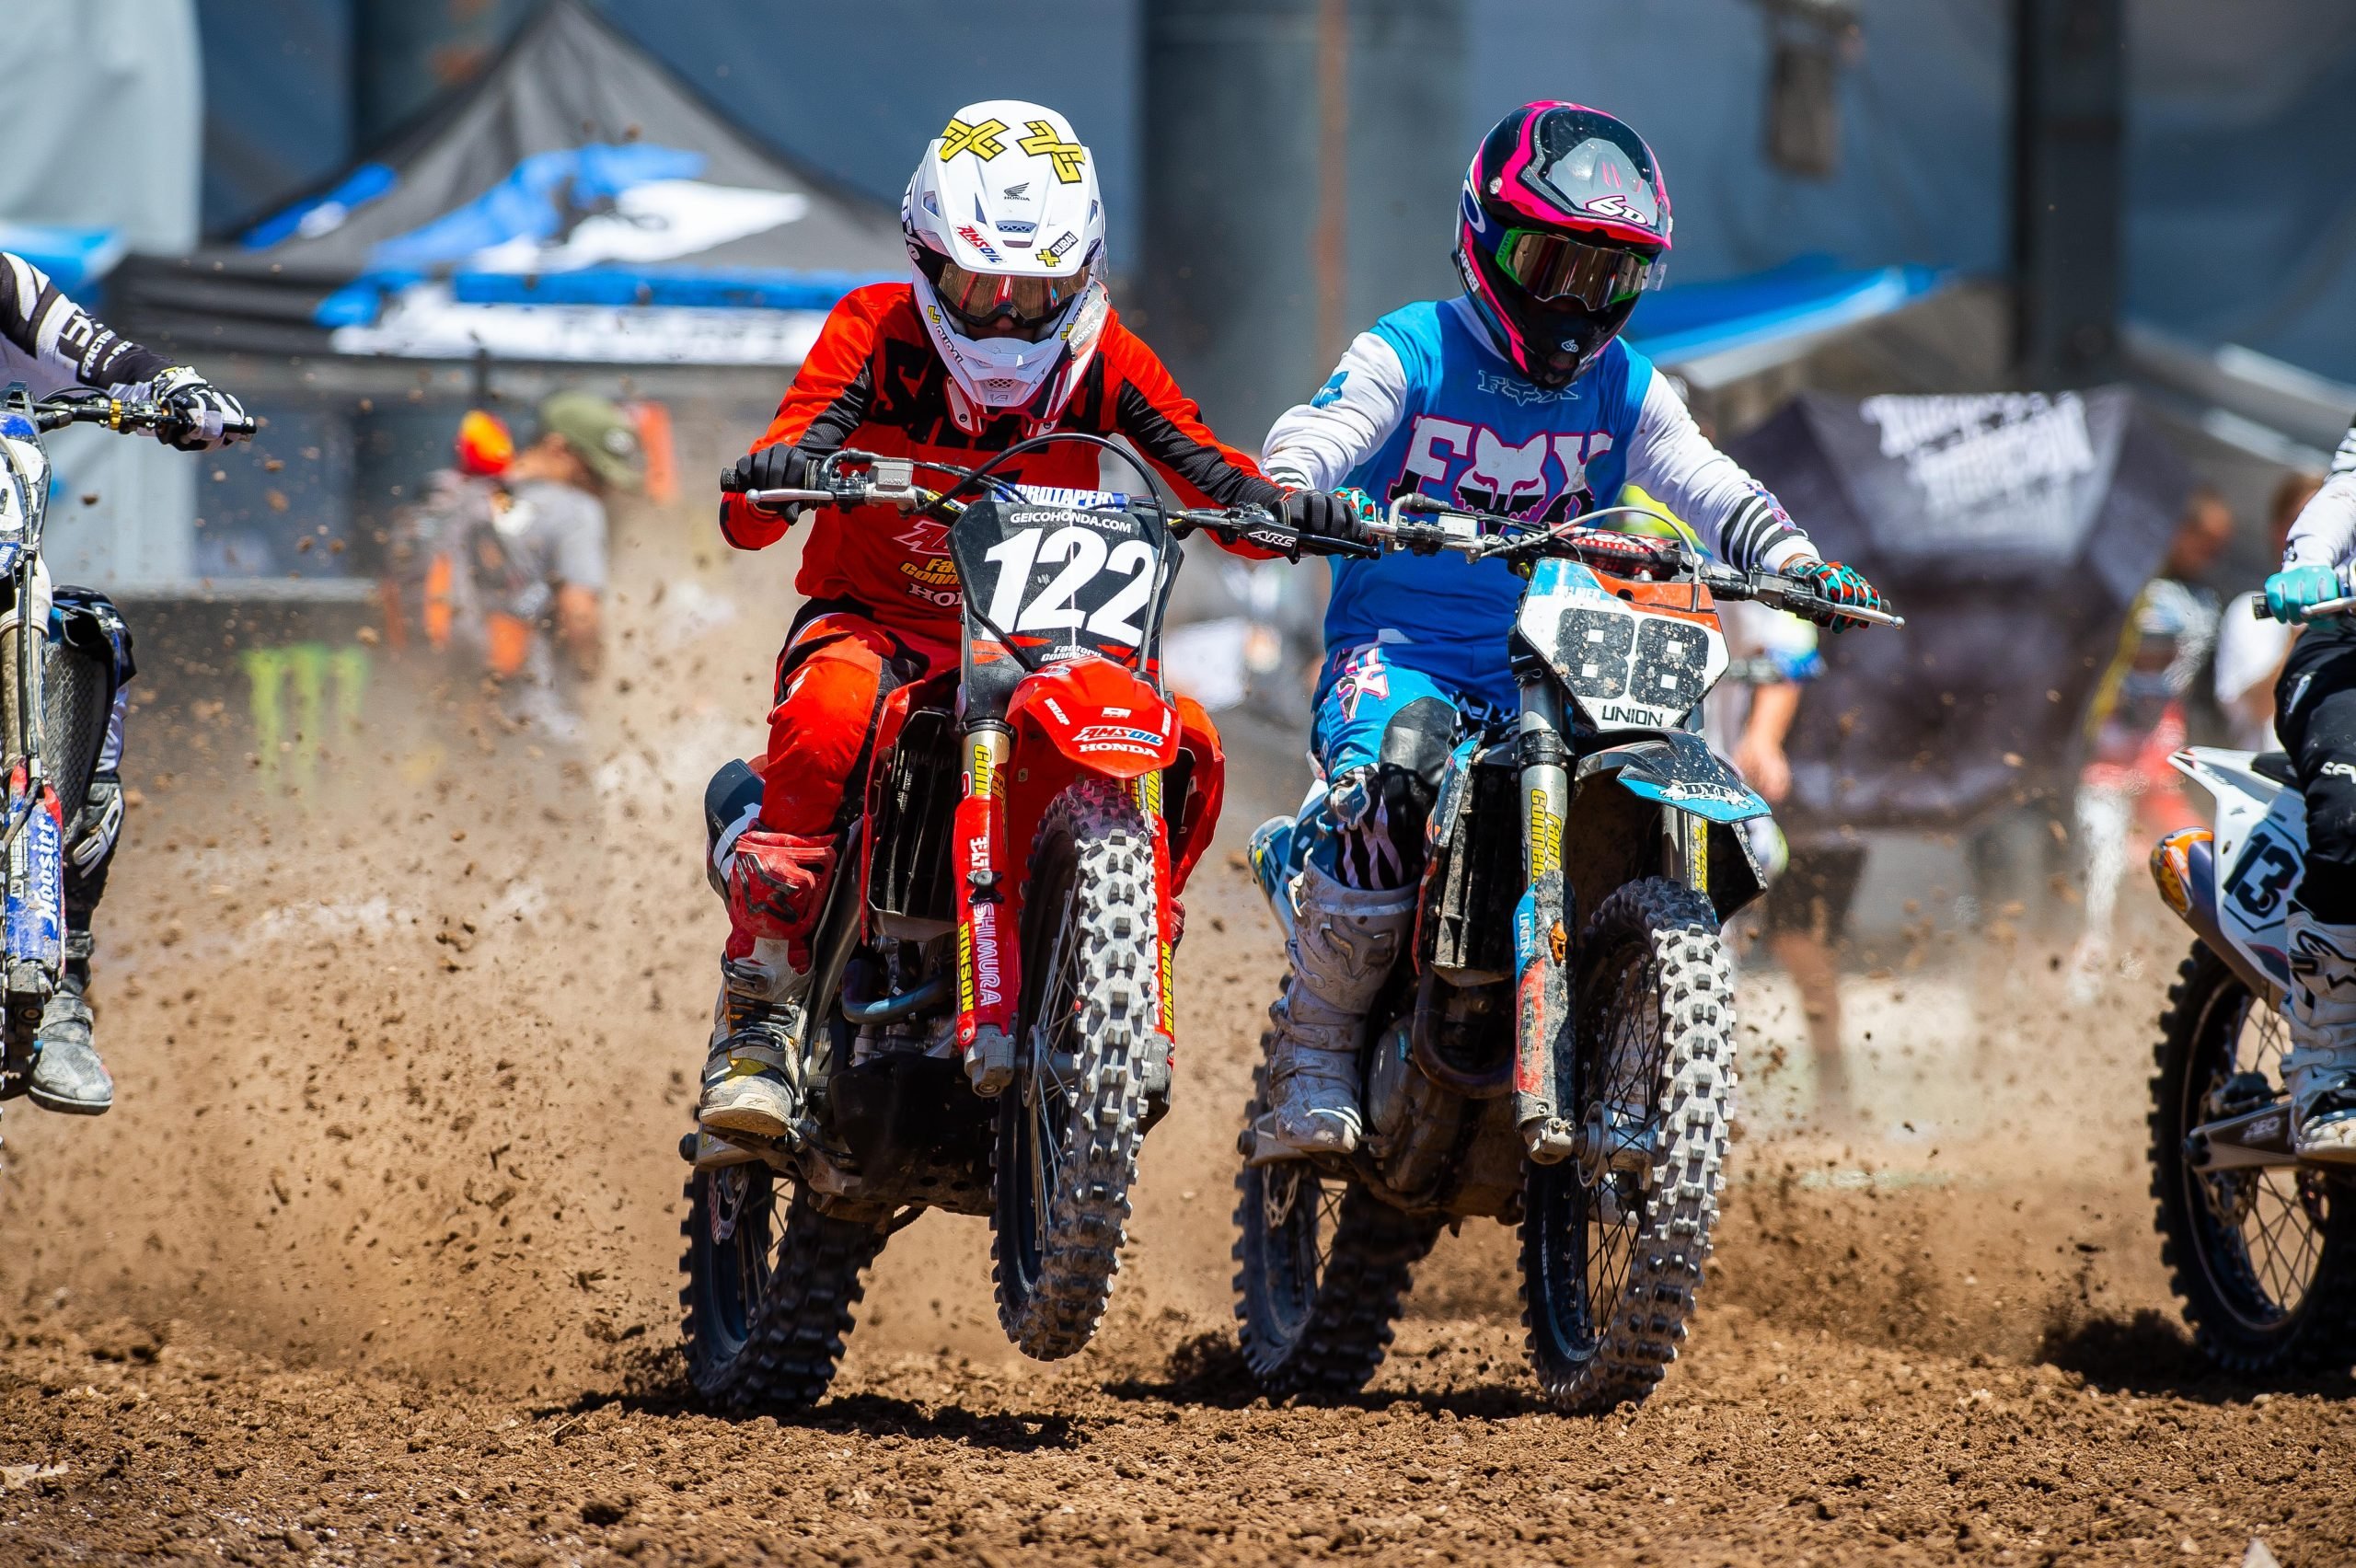 Amsoil Honda’s Carson Mumford (122) and KTM’s Kayden Palmer (88) competing in Las Vegas at the final round of Supercross Futures. Photo Credit: Feld Entertainment, Inc